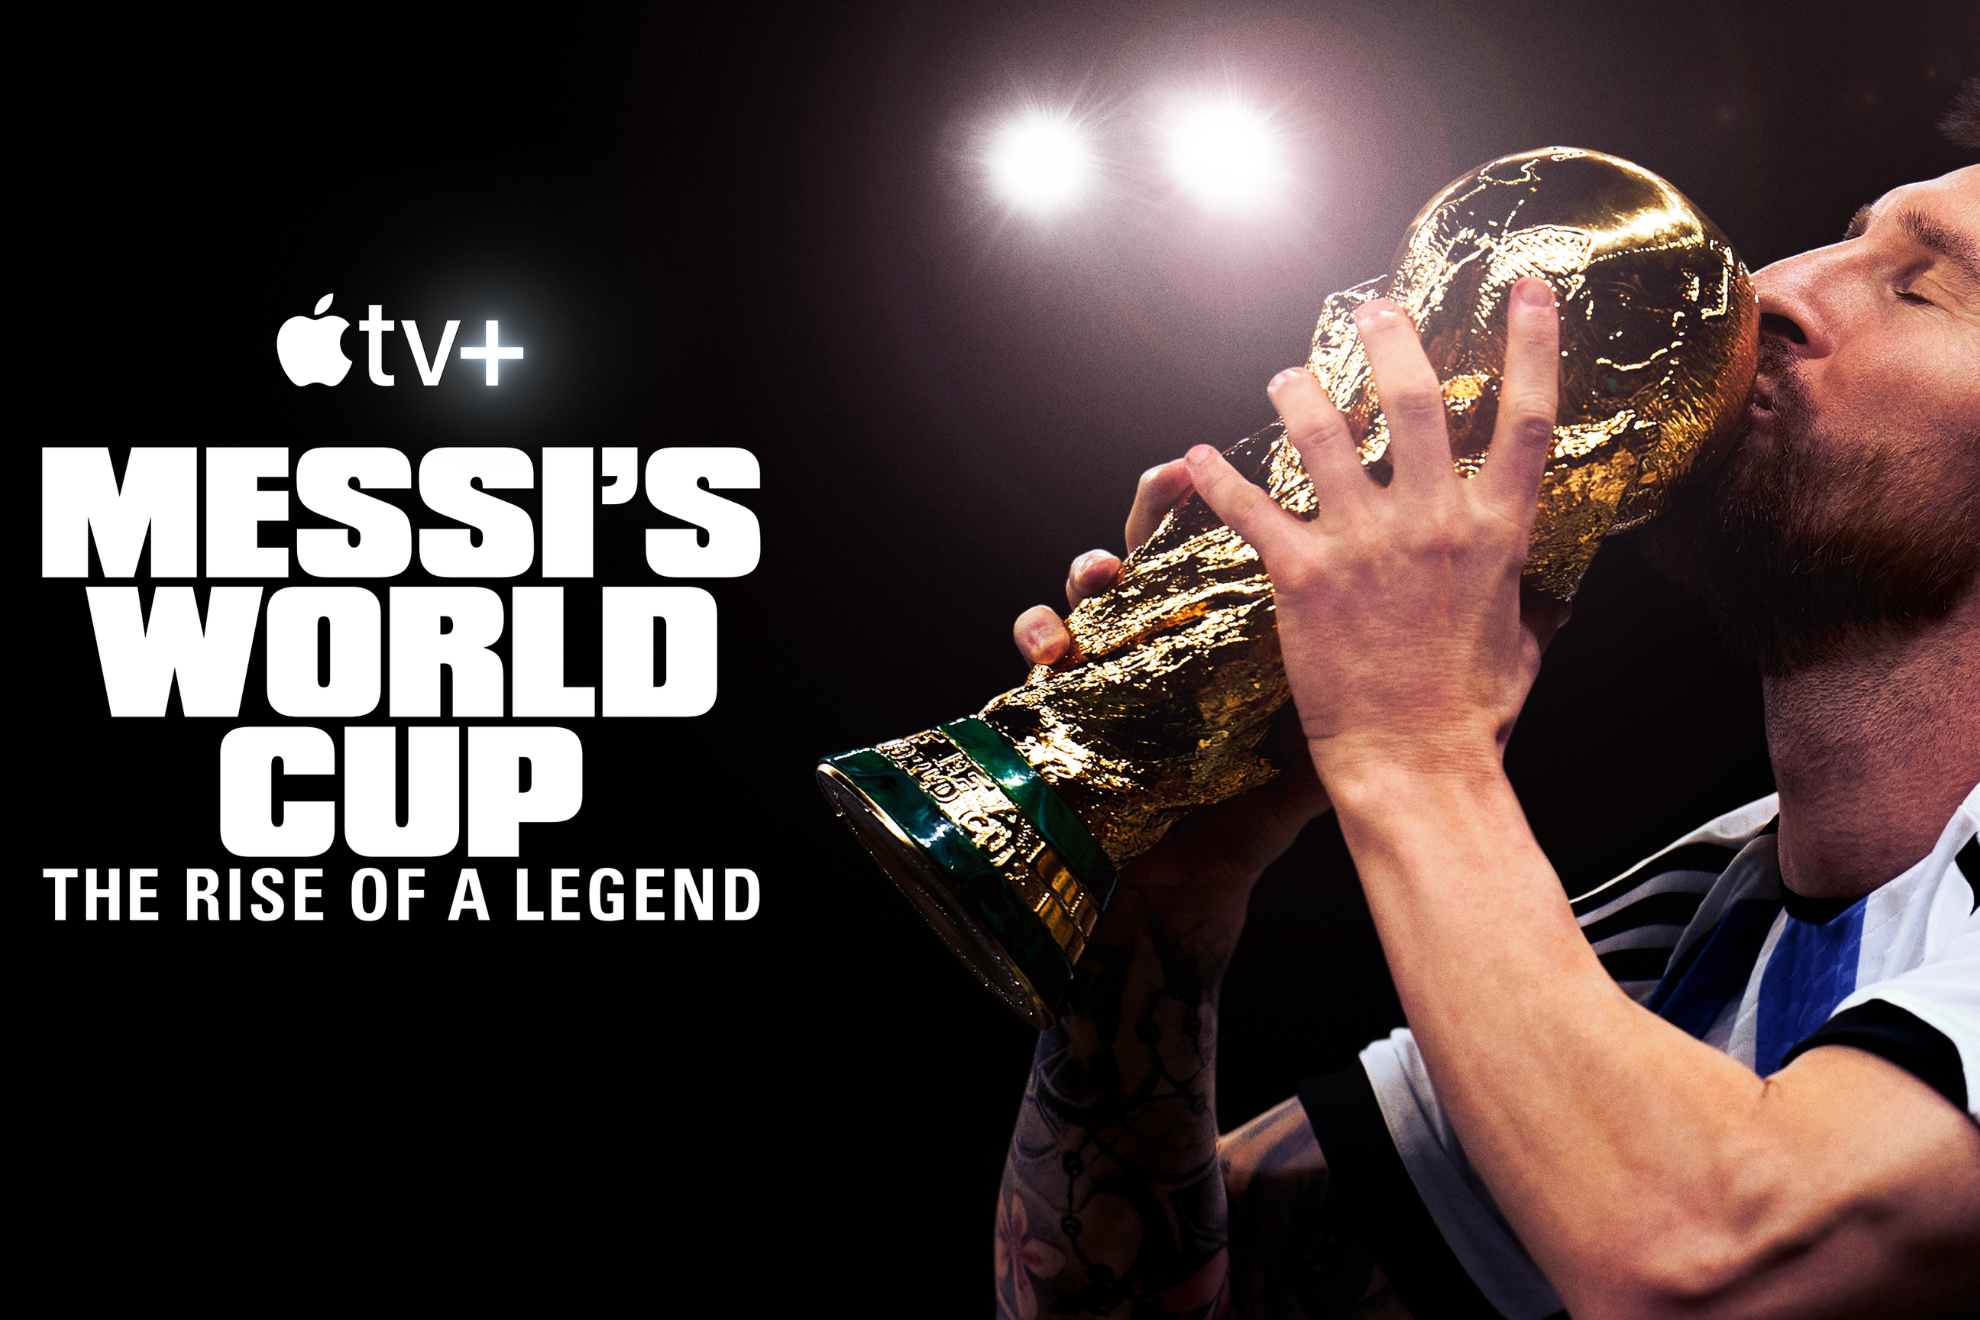 Apple TVs Lionel Messi documentary comes out in one month.